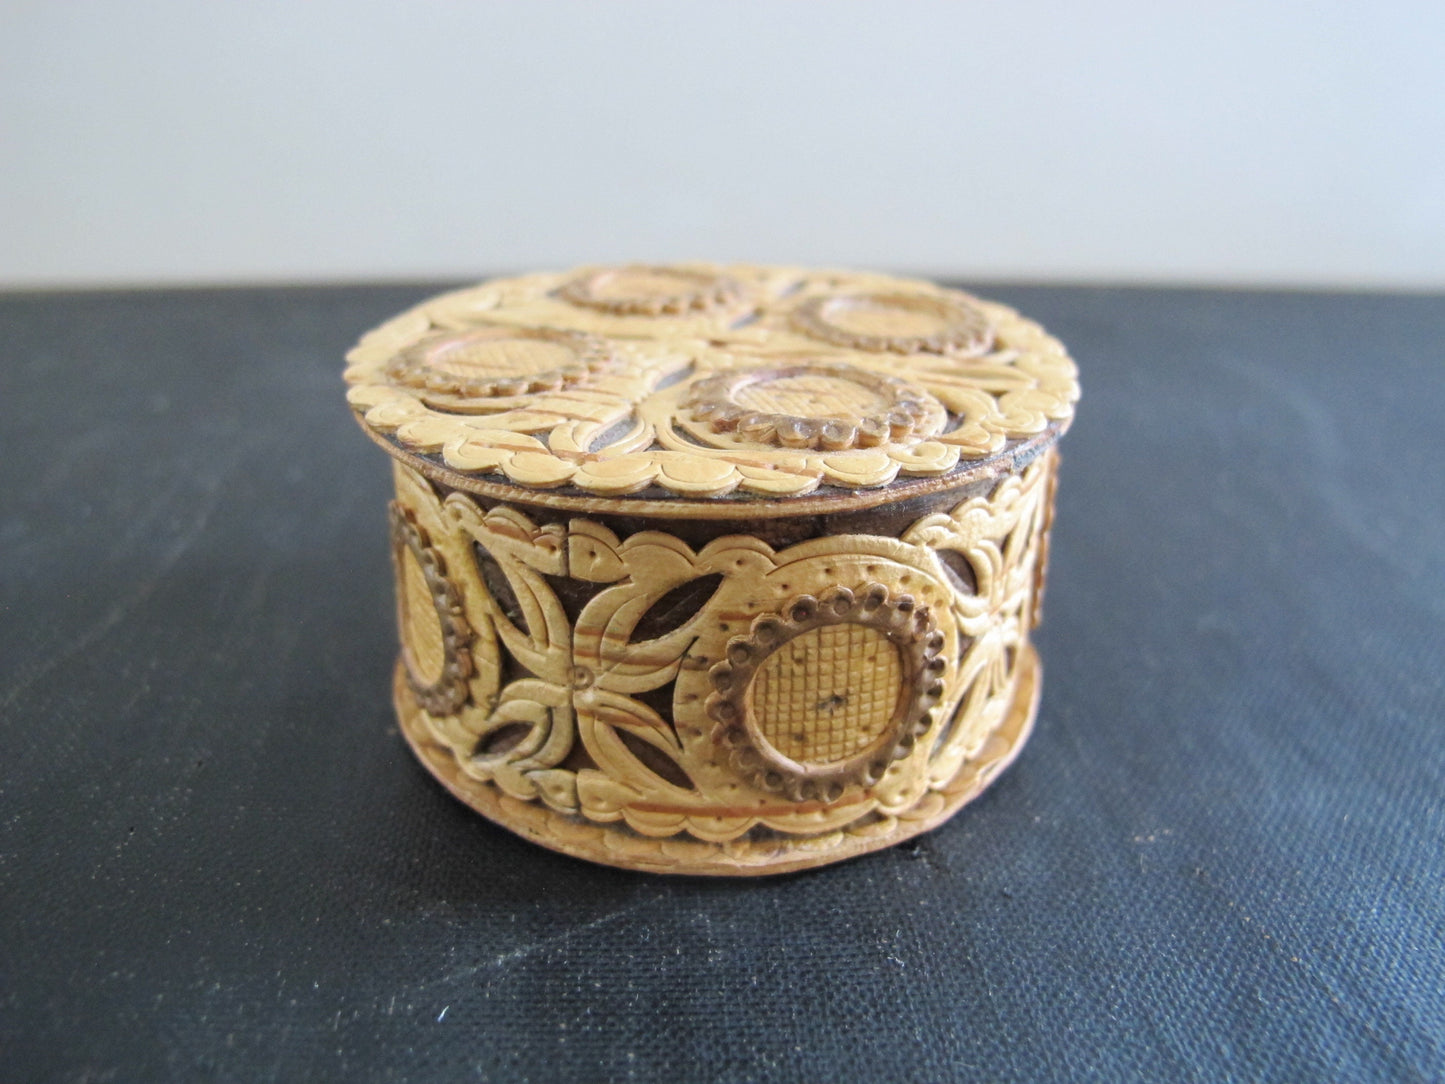 Box Stamped Birch Bark Arts and Crafts 1910s 1920s Pyrography